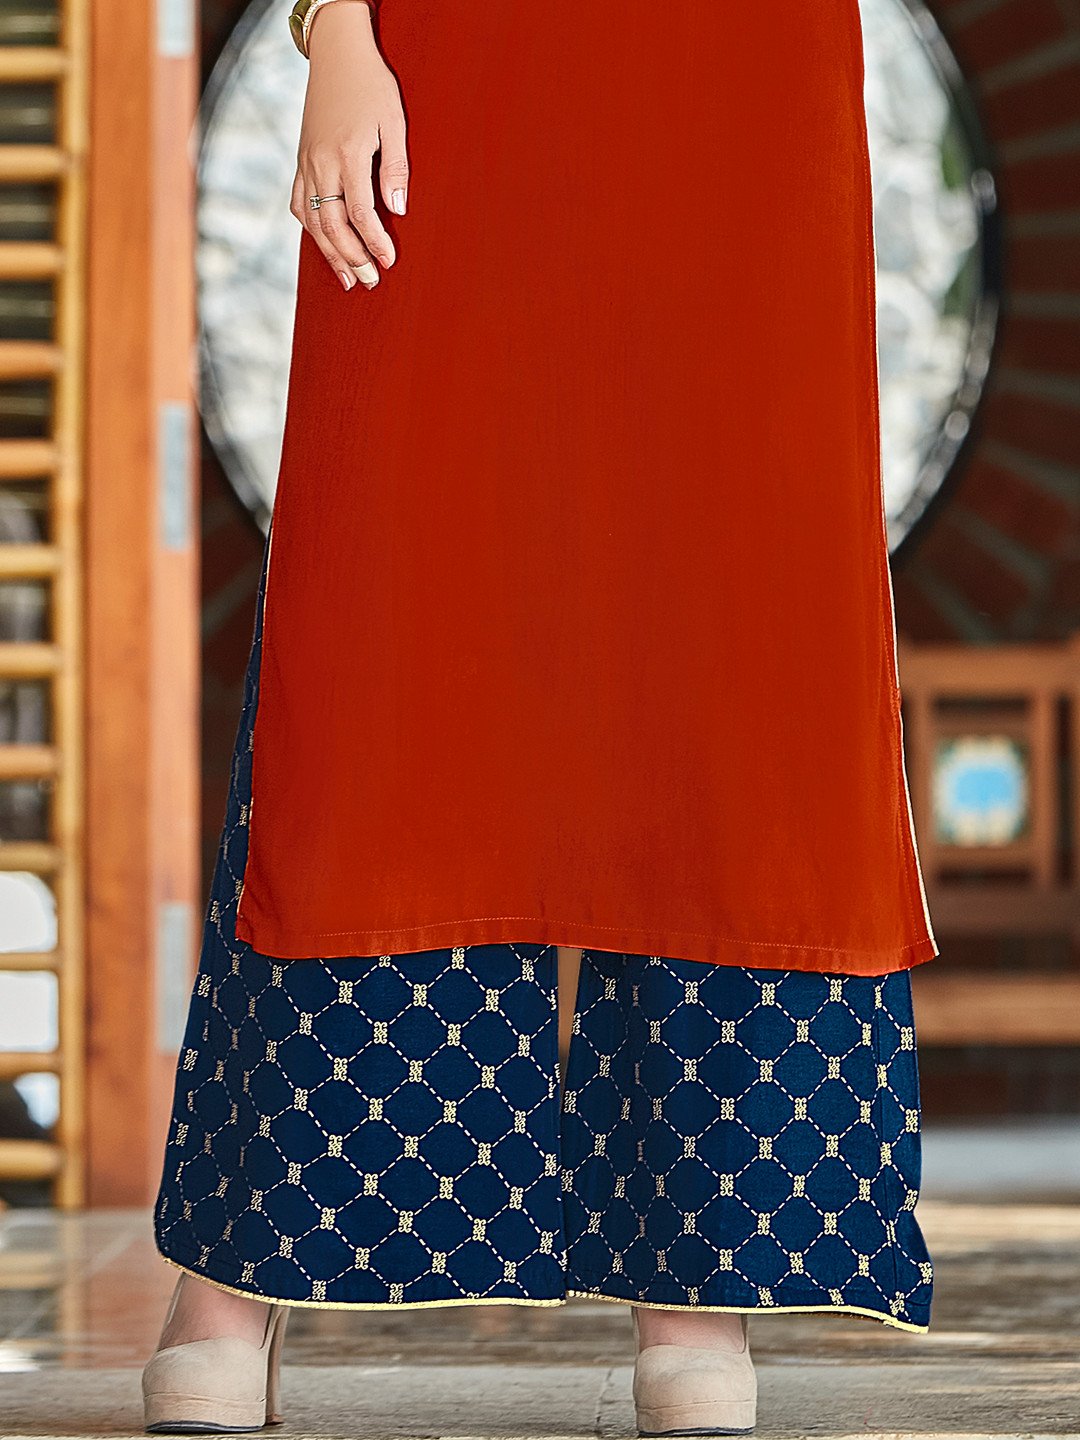 ZOLA Printed Red Kurti Palazzo Pants Set with Pockets for Women :  Amazon.in: Fashion